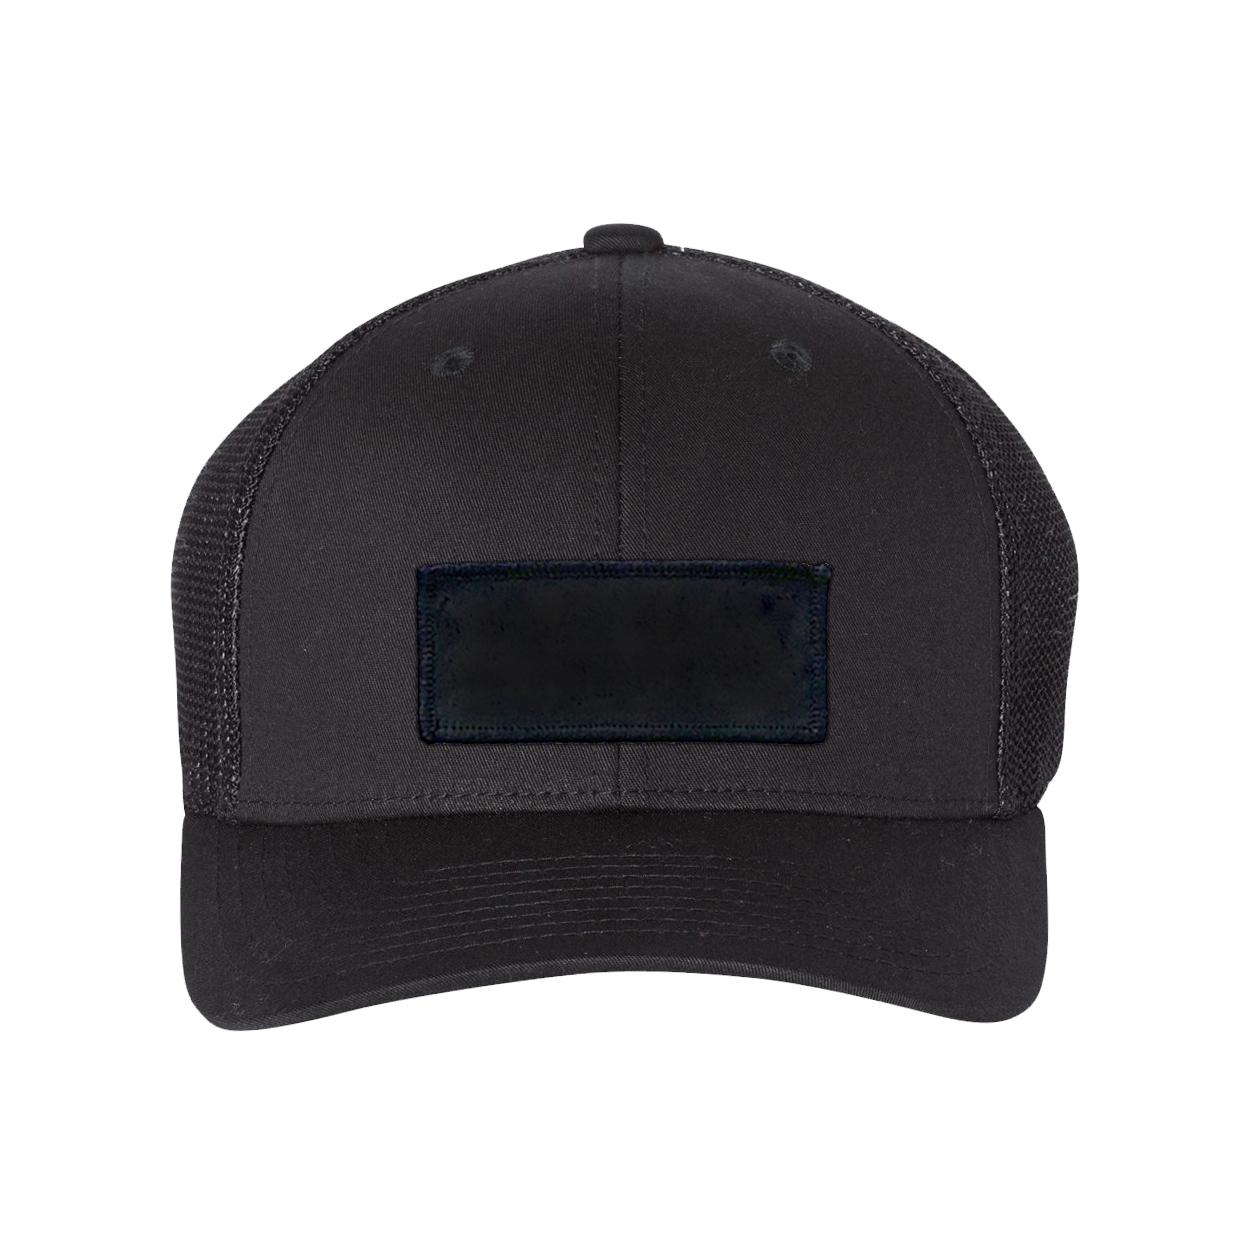 Product Details: Classic Woven Patch Snapback Trucker Hat Black (BW 6 PANEL SNAPBACK MESH 5216)